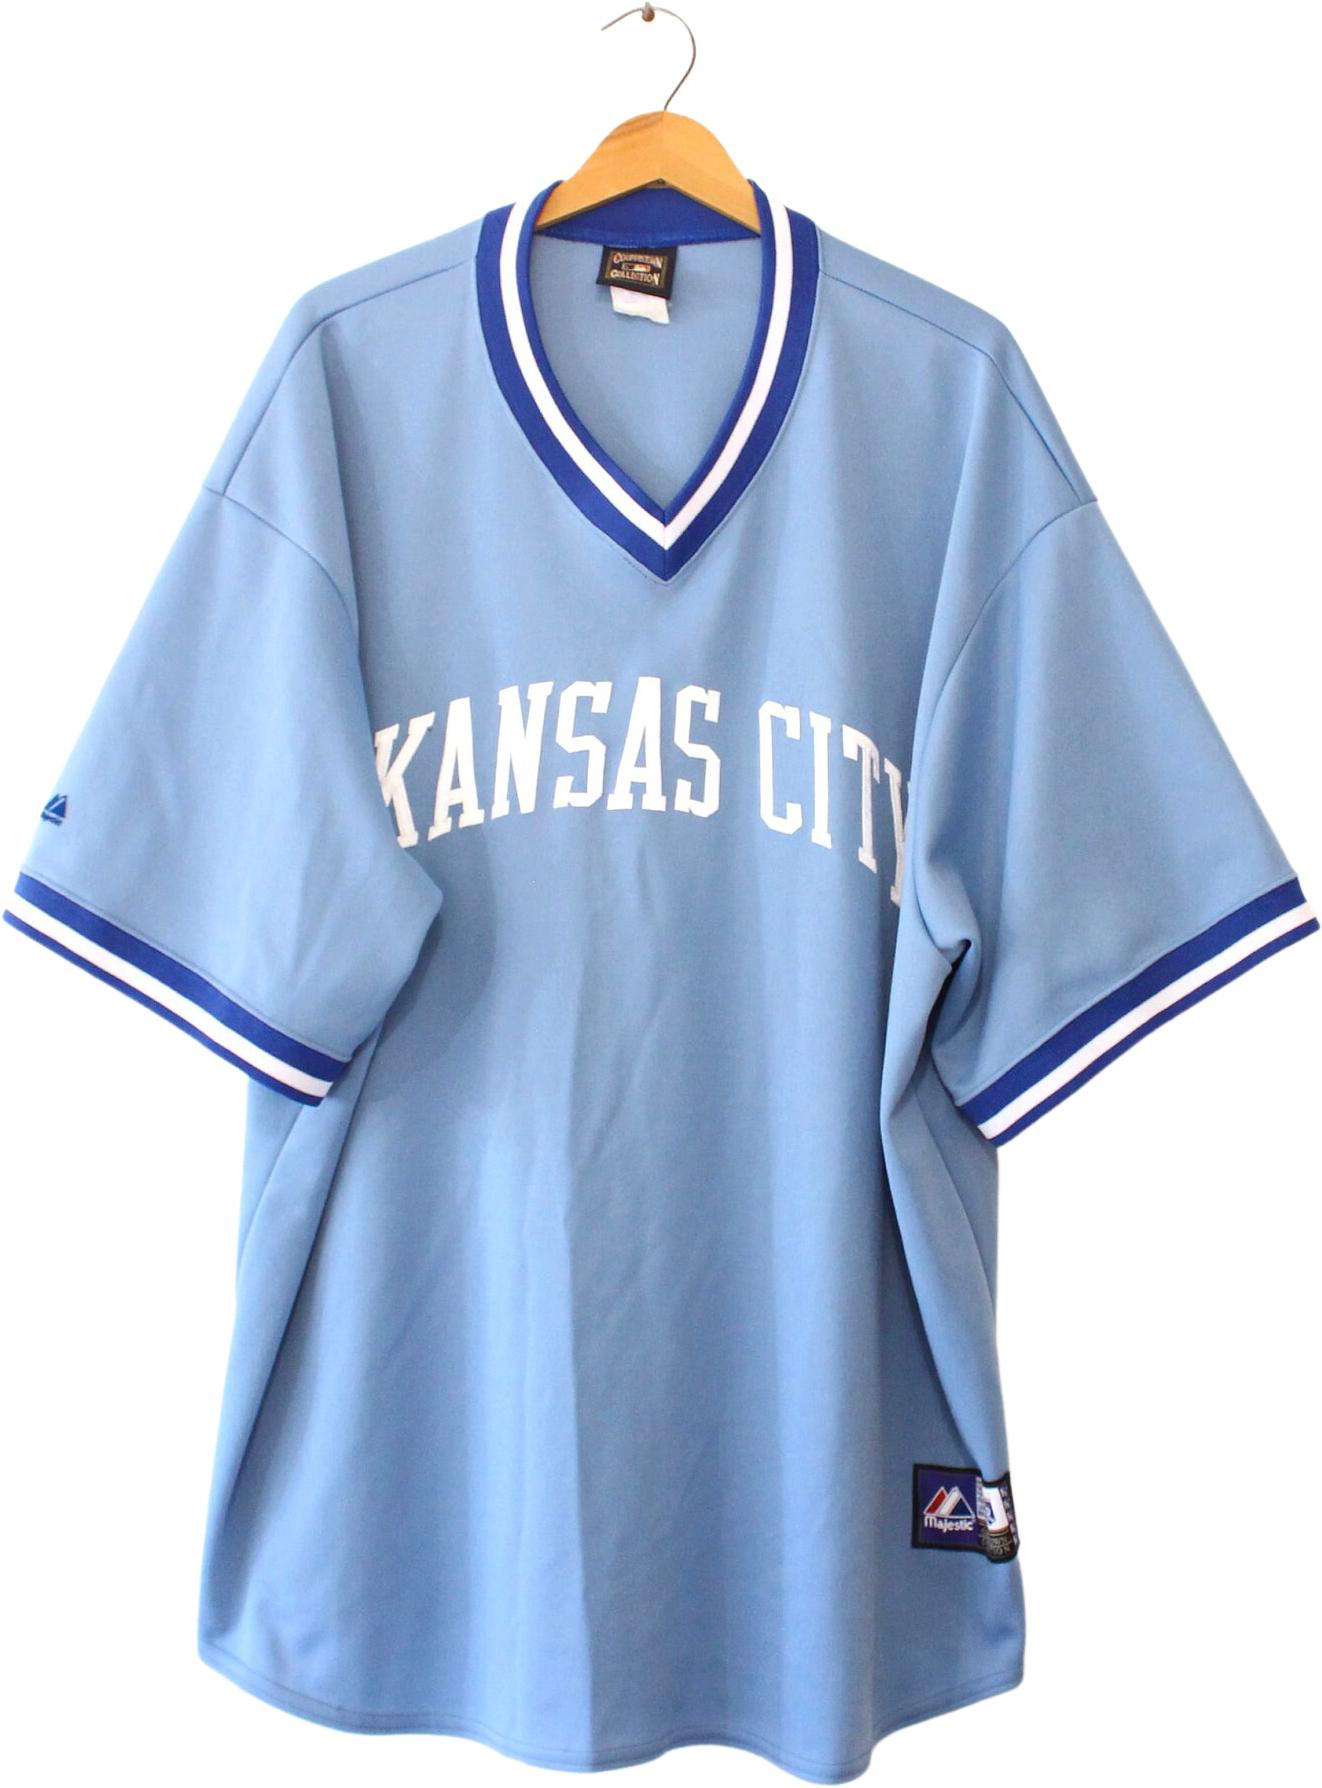 Vintage Kansas City Royals Baseball Jersey by Cooperstown